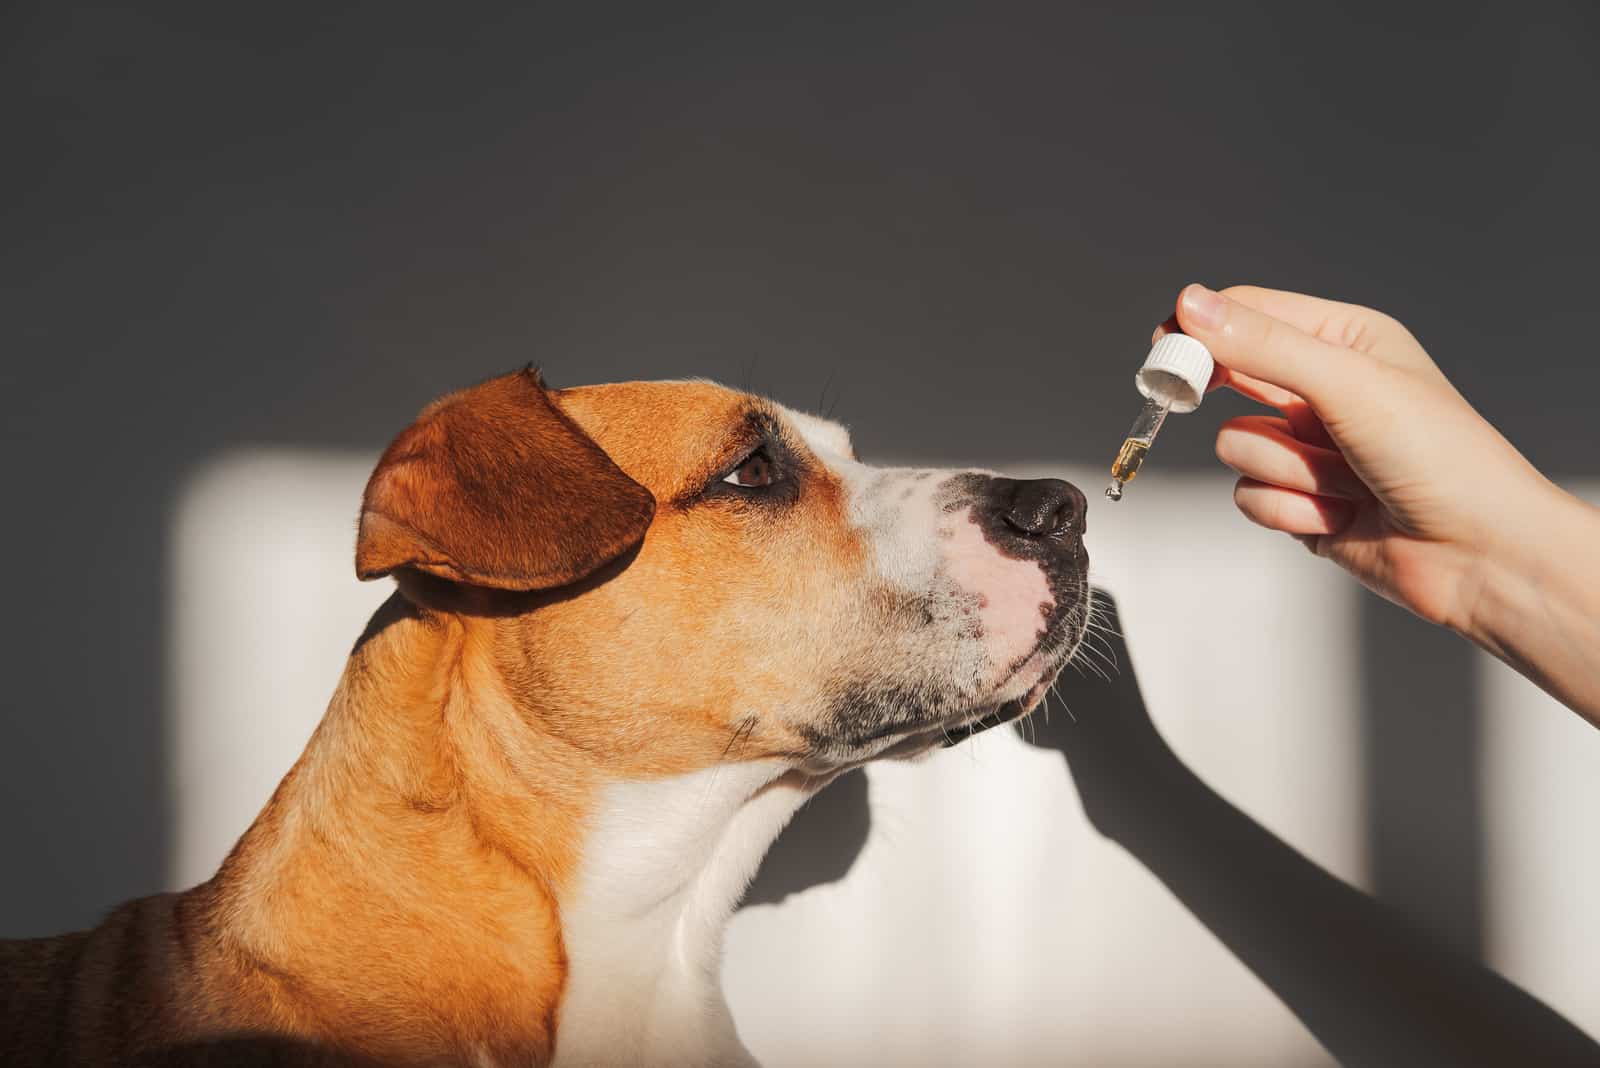 How To Sedate A Dog For Nail Clipping: 6 Useful Tips